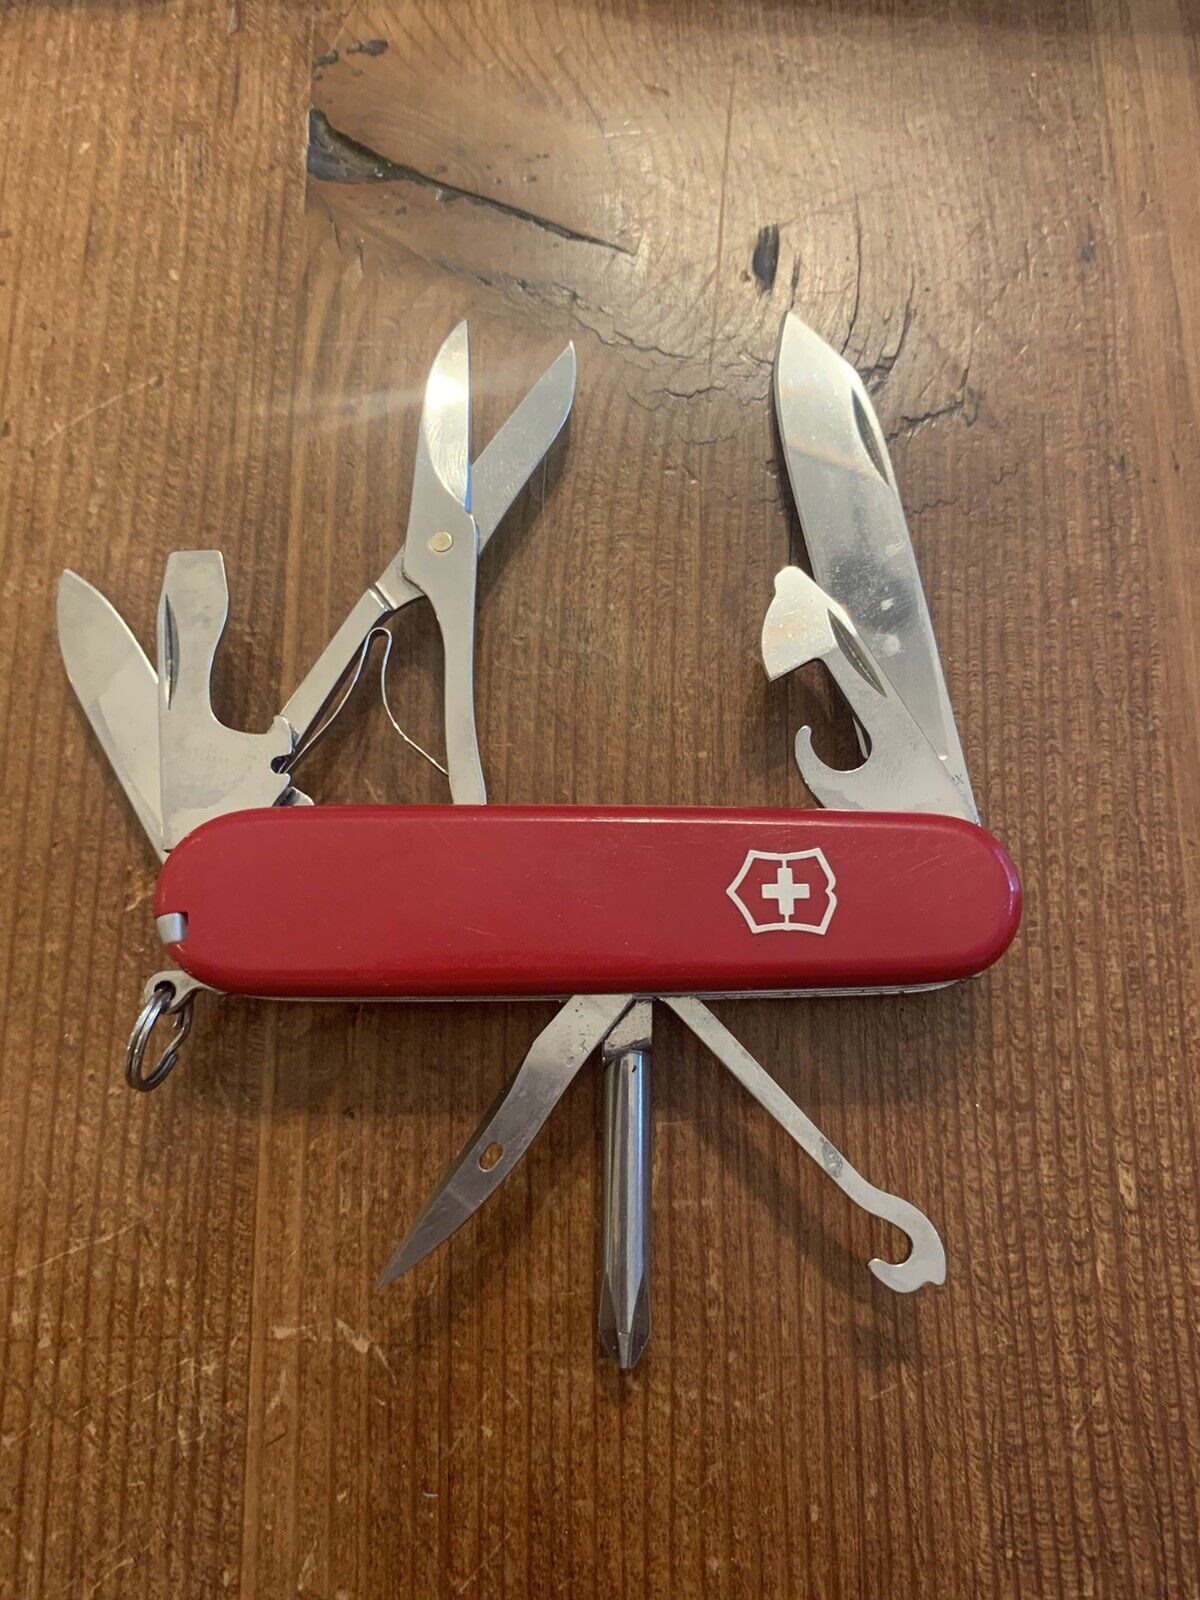 Victorinox Super Tinker Swiss Army Knife - In Excellent Pre-Owned Condition